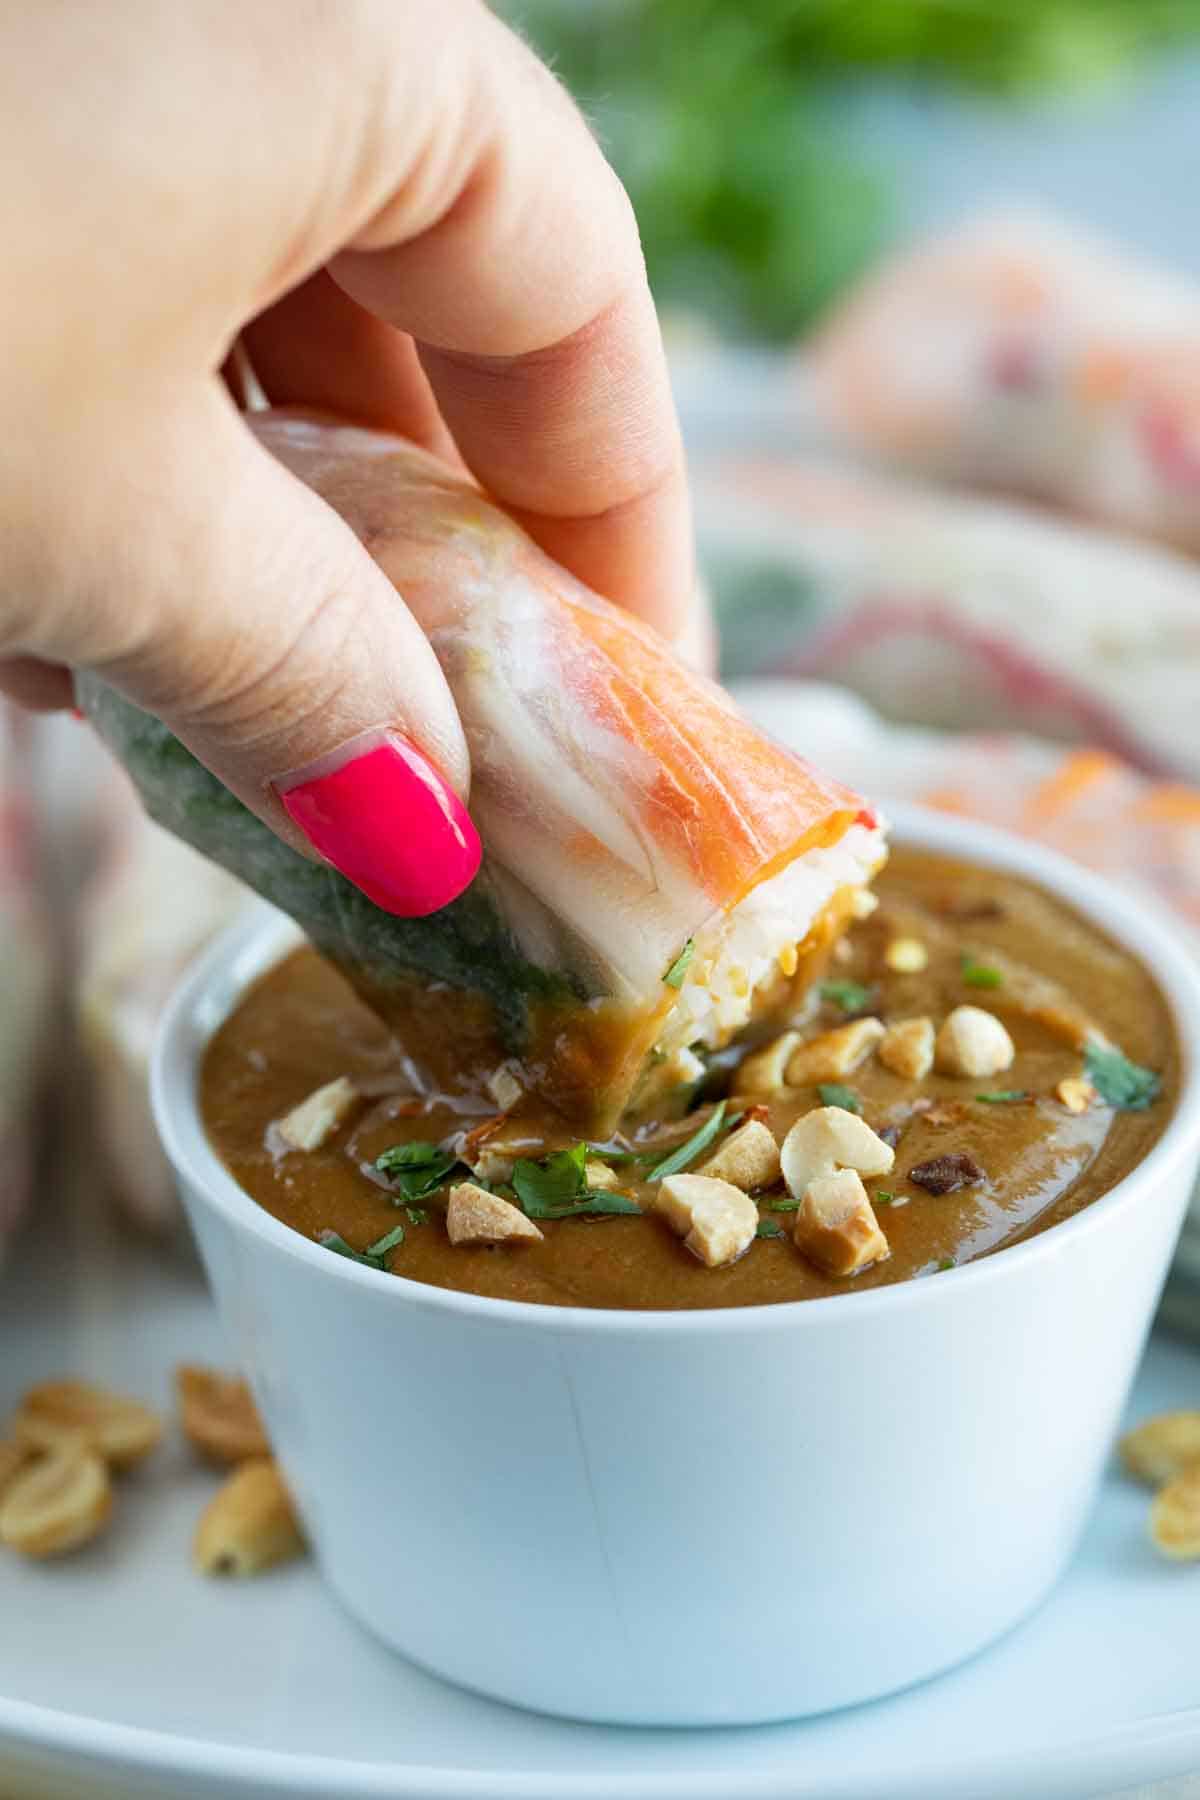 dipping a spring roll into Peanut Sauce